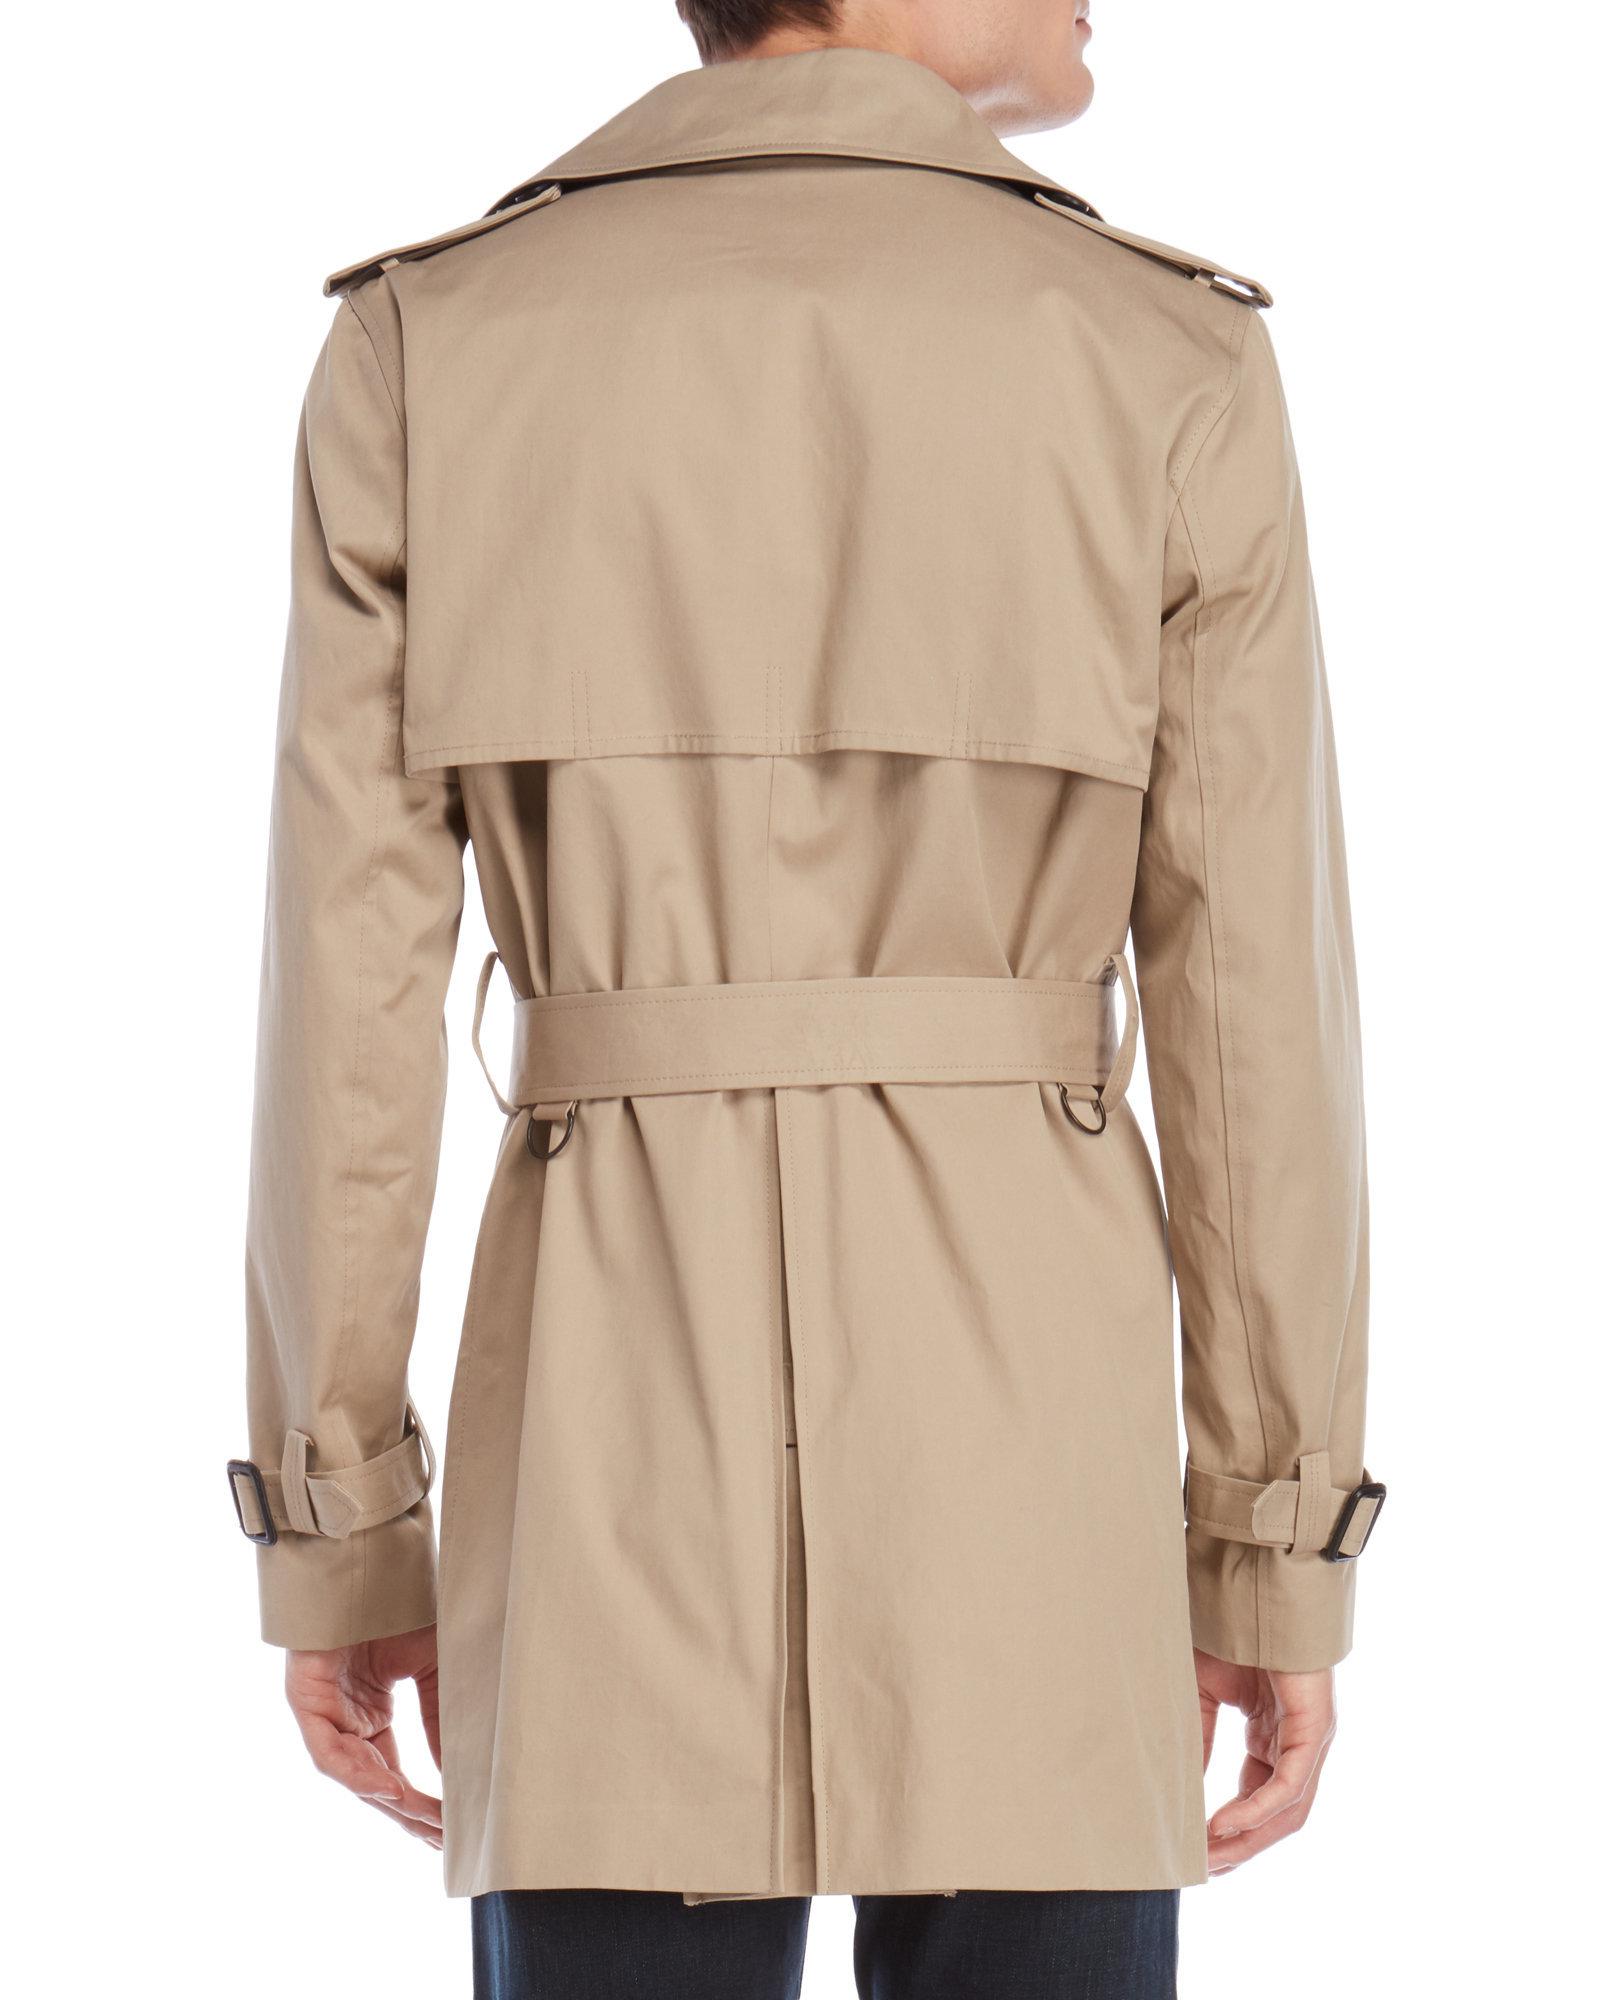 Sandro Cotton Belted Trench Coat in Beige (Natural) for Men - Lyst